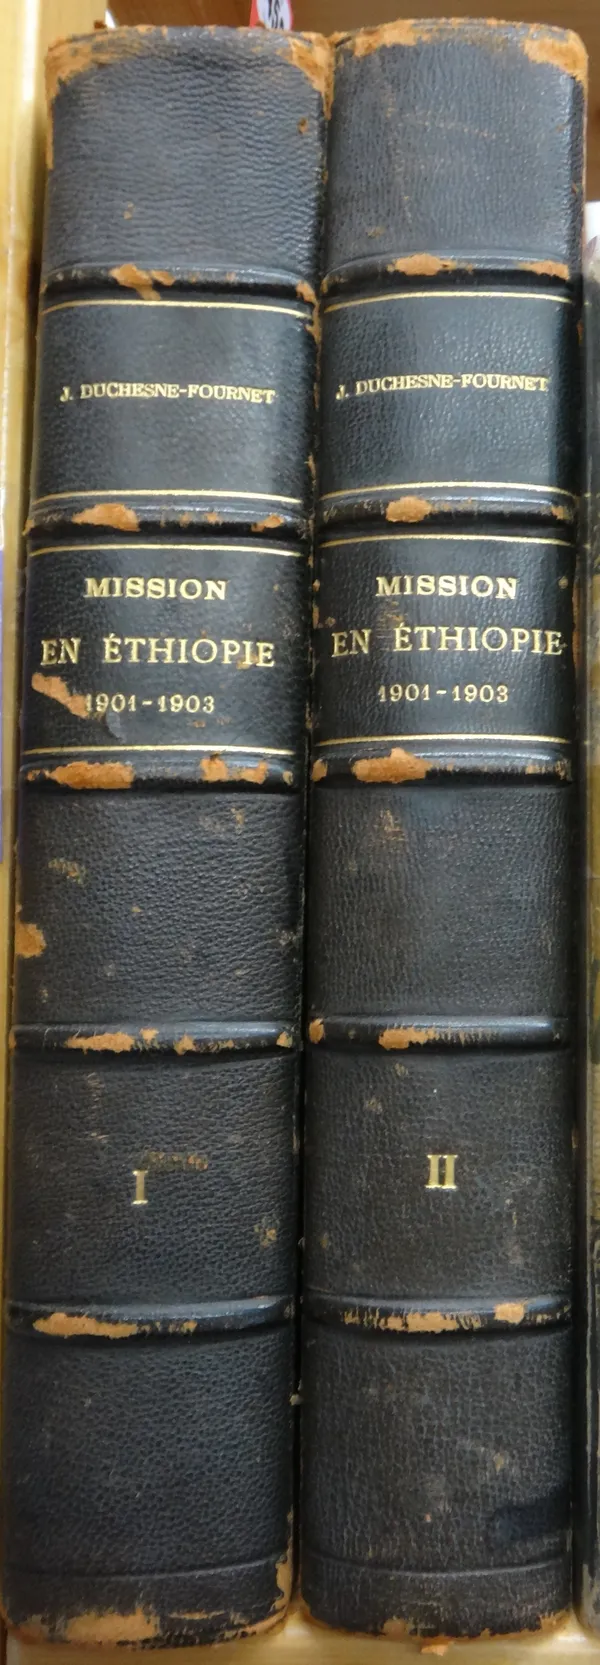 DUCHESNE-FOURNET (J.)  Mission in Ethiopie (1901-1903).  First Edition, 2 vols. 28 photogravure & 10 facsimile plates, 12 tables (4 d-page), a hand-co